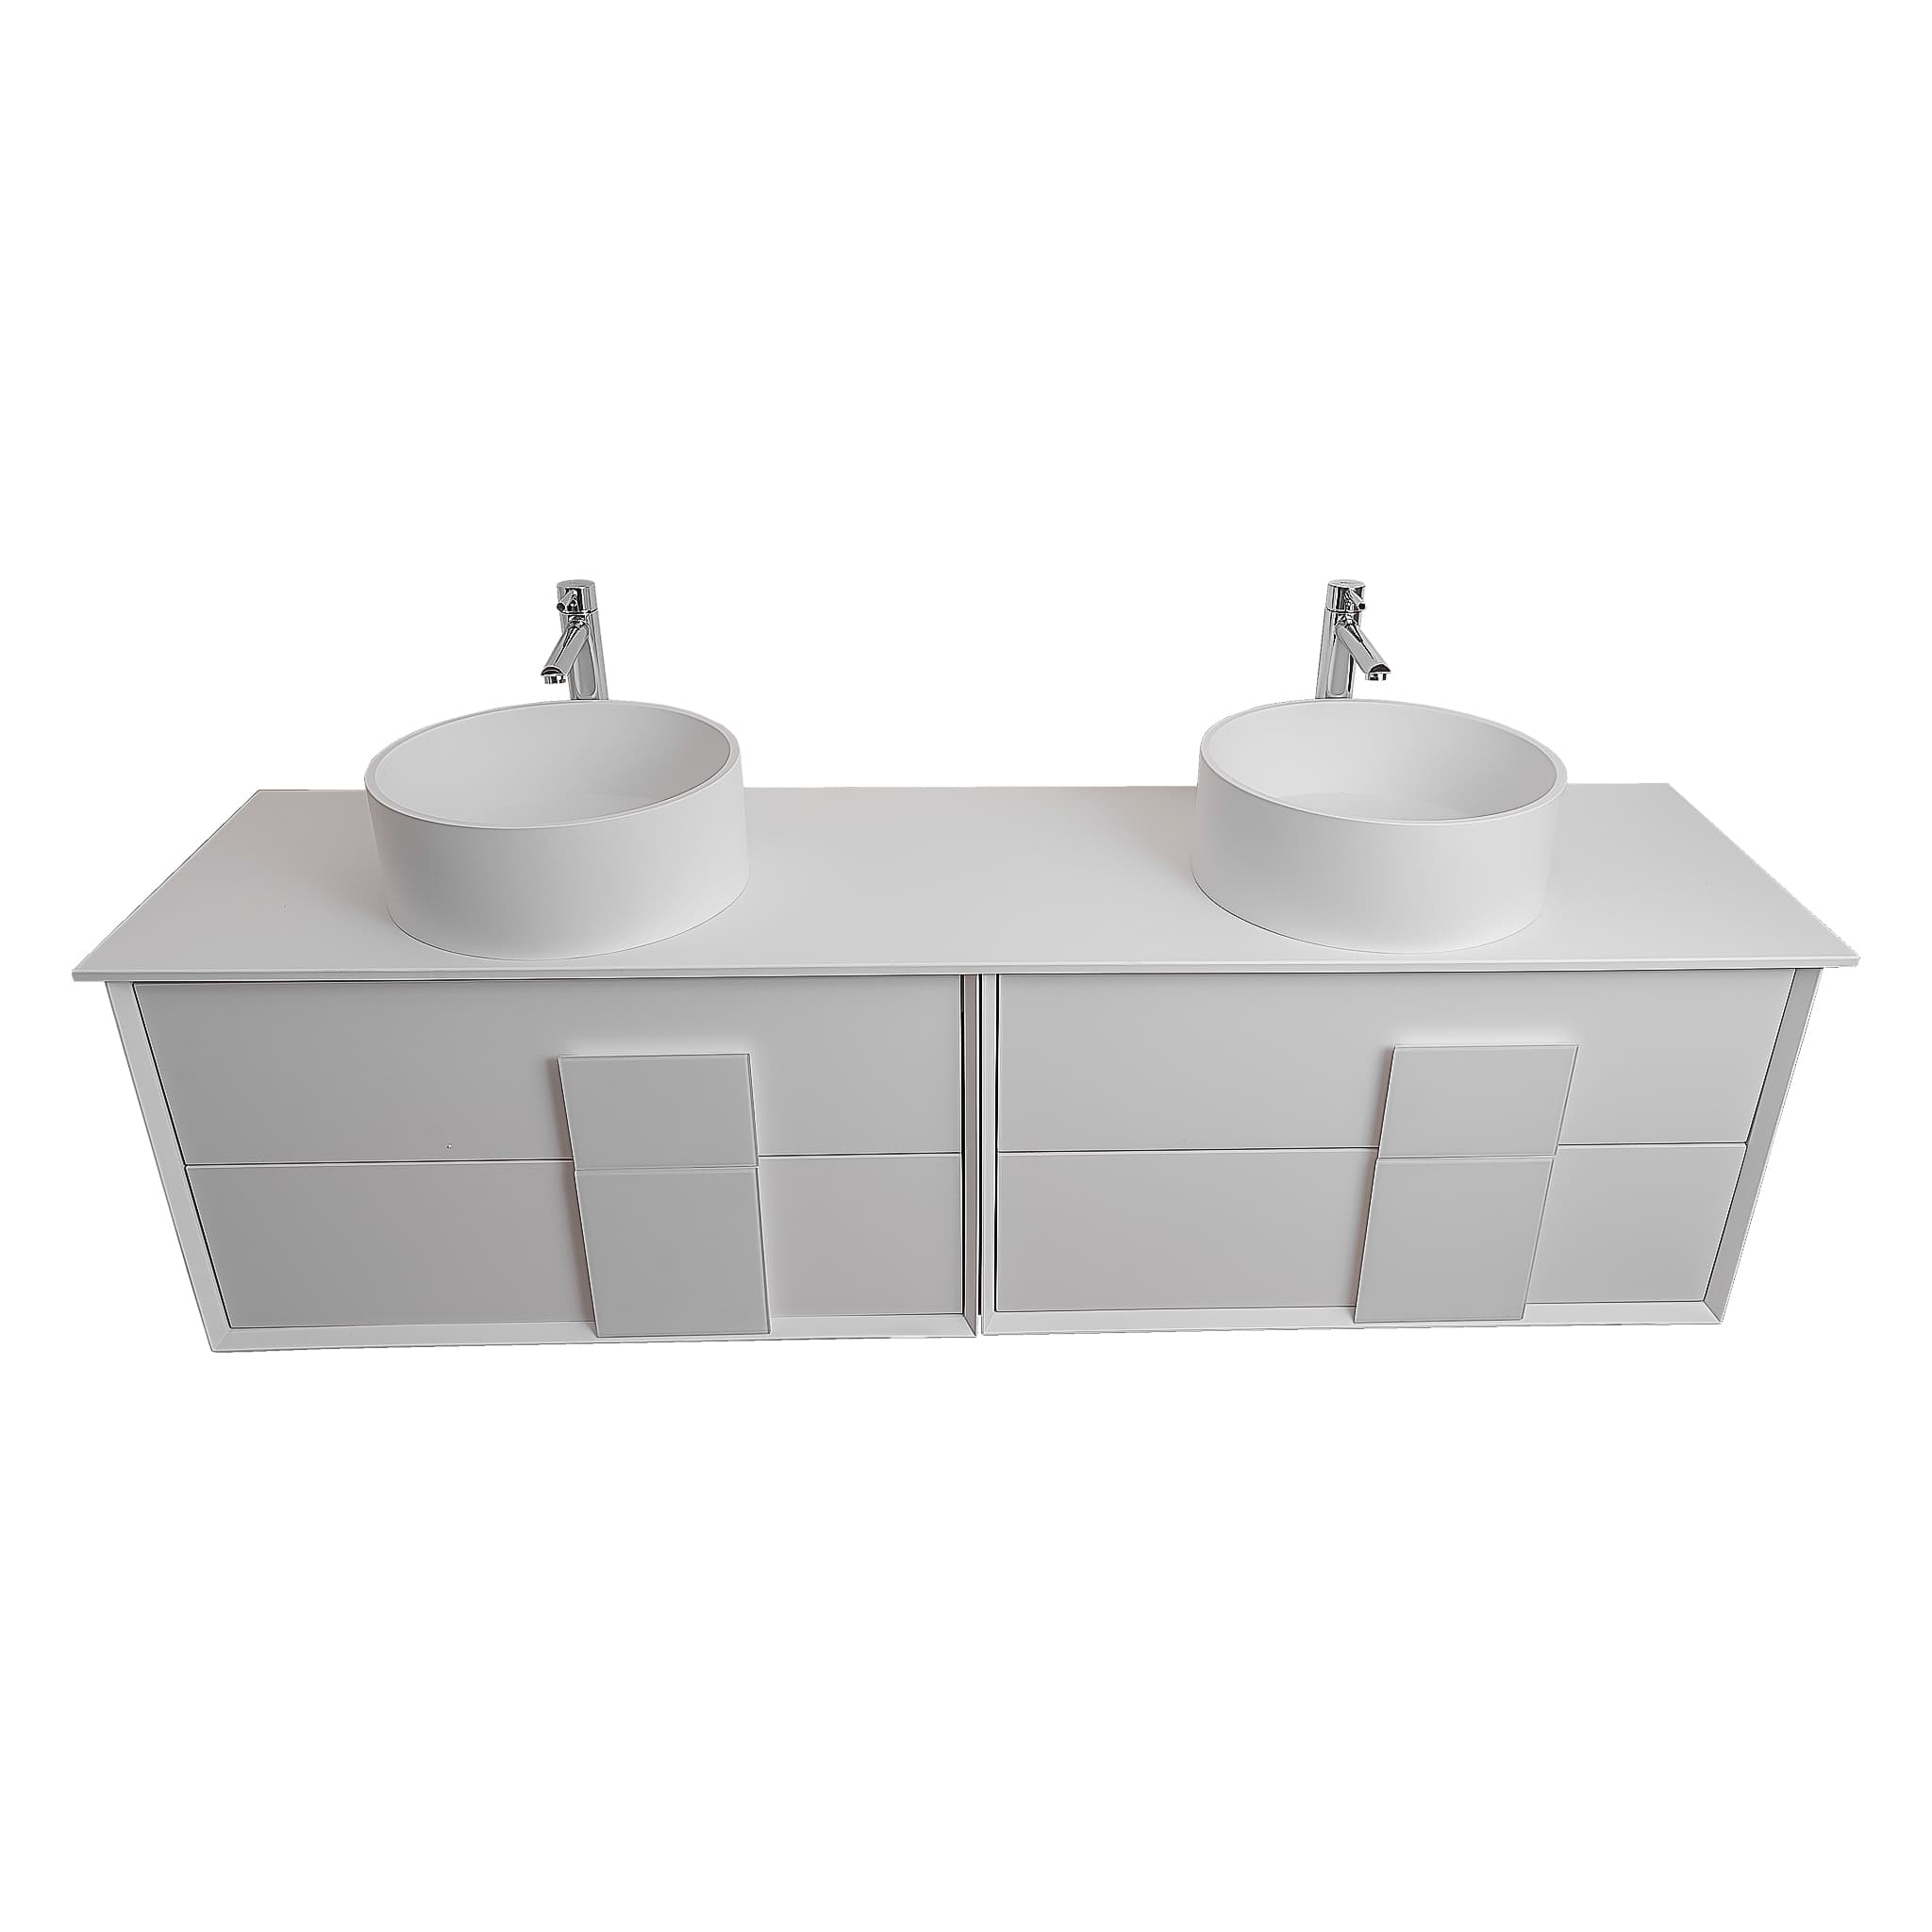 Piazza 63 Matte White With White Handle Cabinet, Solid Surface Flat White Counter and Two Round Solid Surface White Basin 1386, Wall Mounted Modern Vanity Set